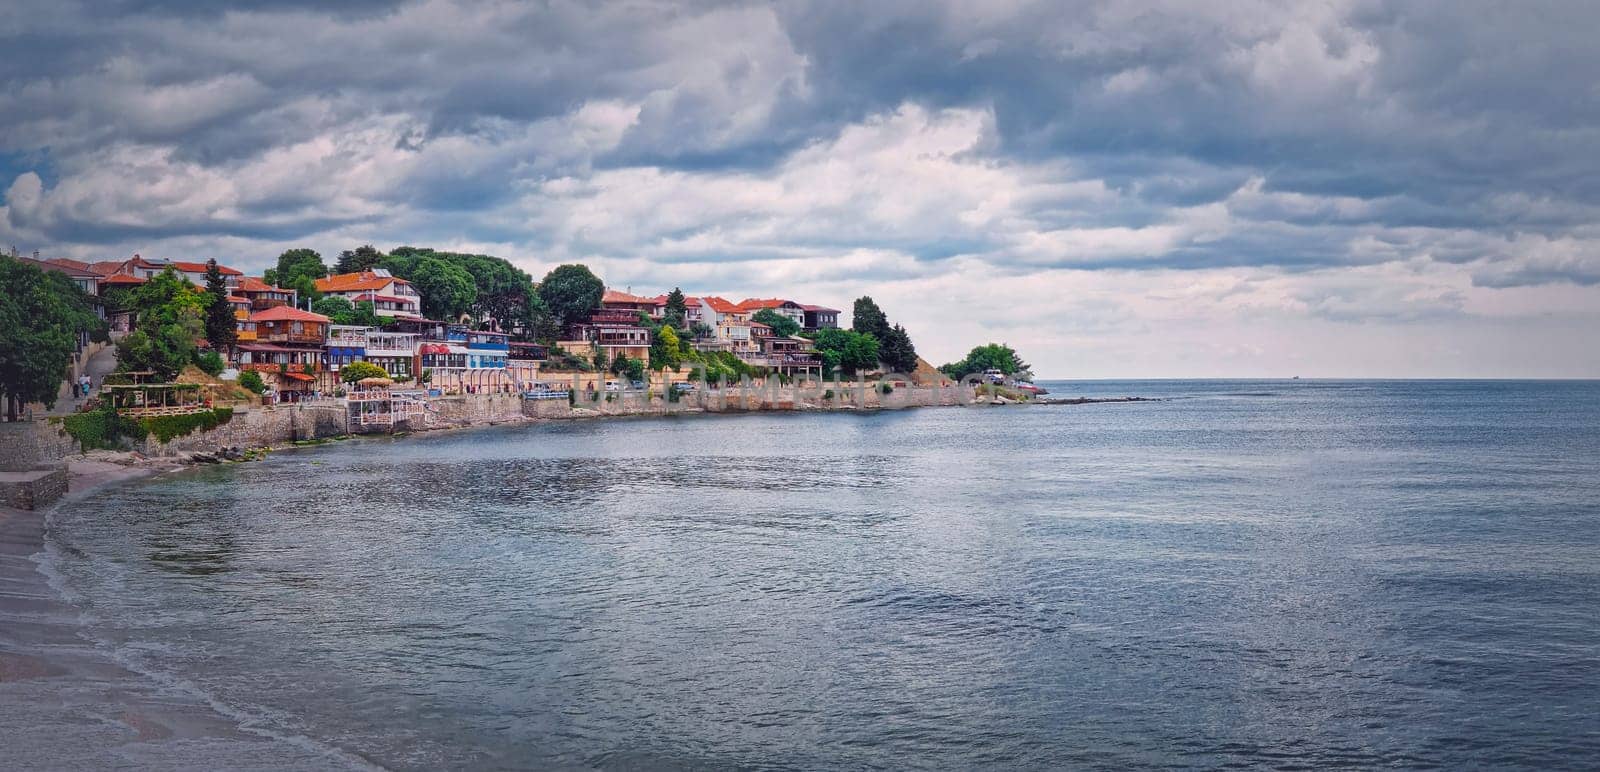 The old town of Nessebar, UNESCO world heritage on the Black Sea coastline, Burgas Region, Bulgaria. Sightseeing panorama with ancient houses on the coast by psychoshadow